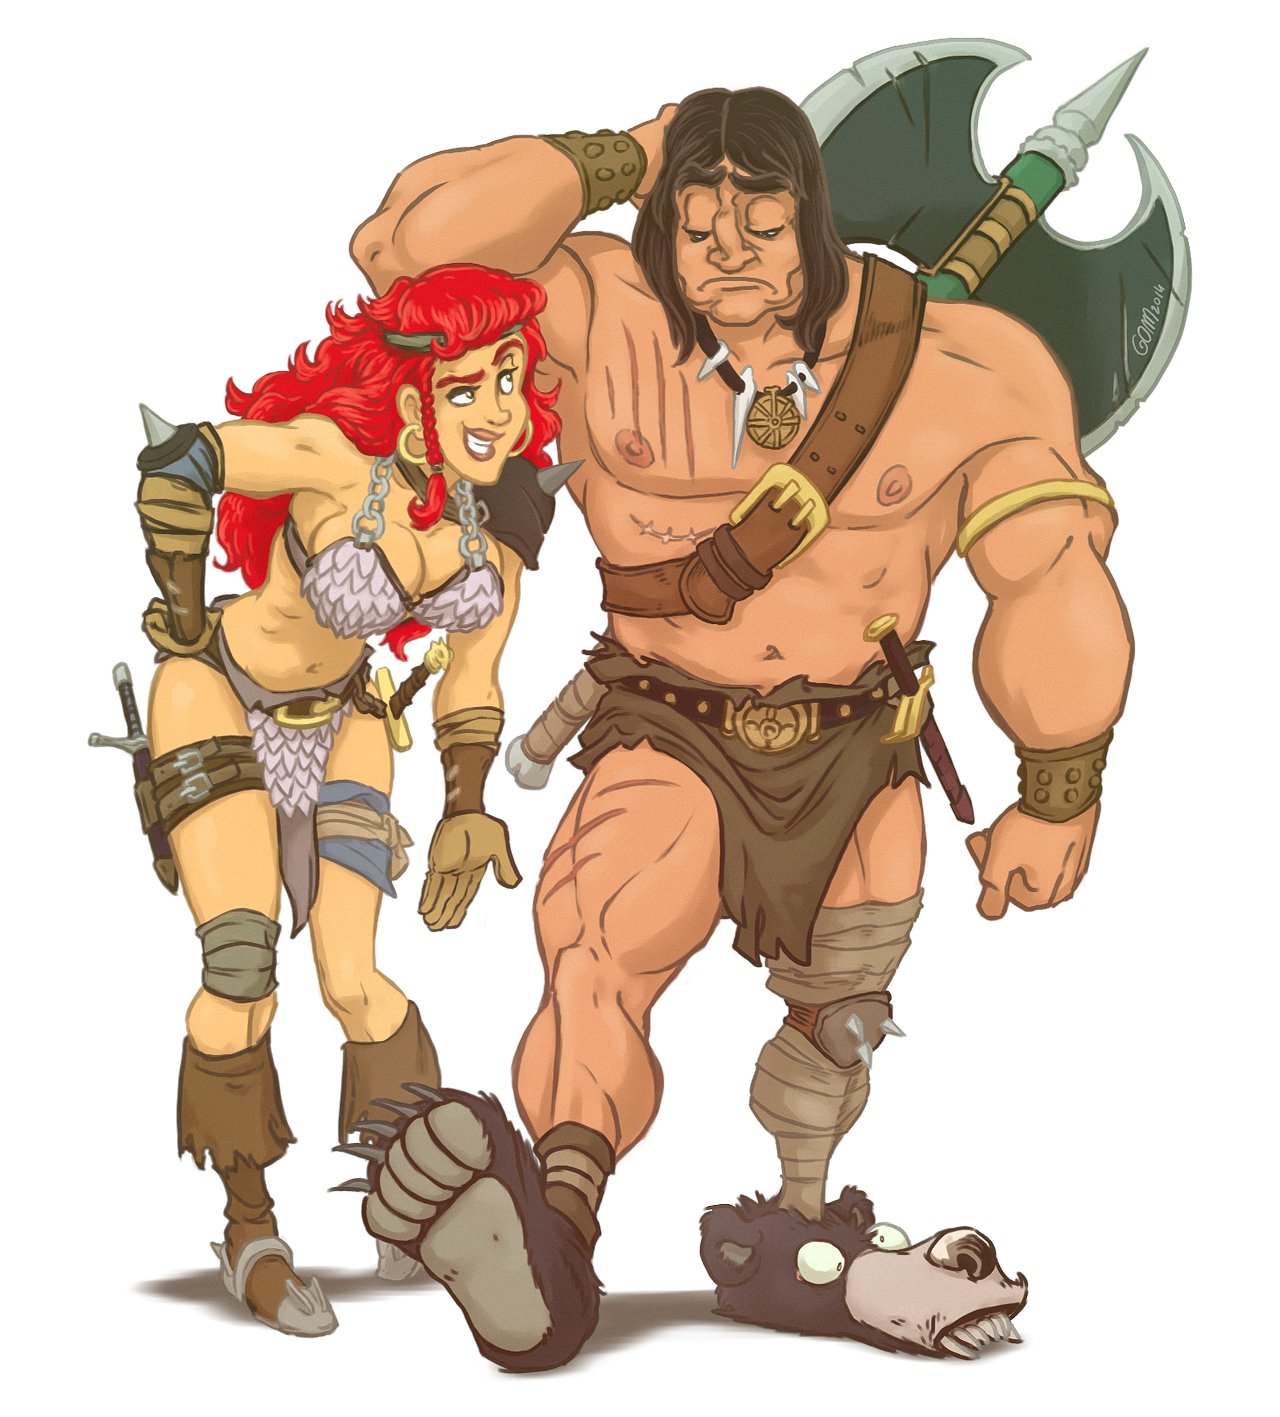 ArtStation - Conan Rogues in the house color